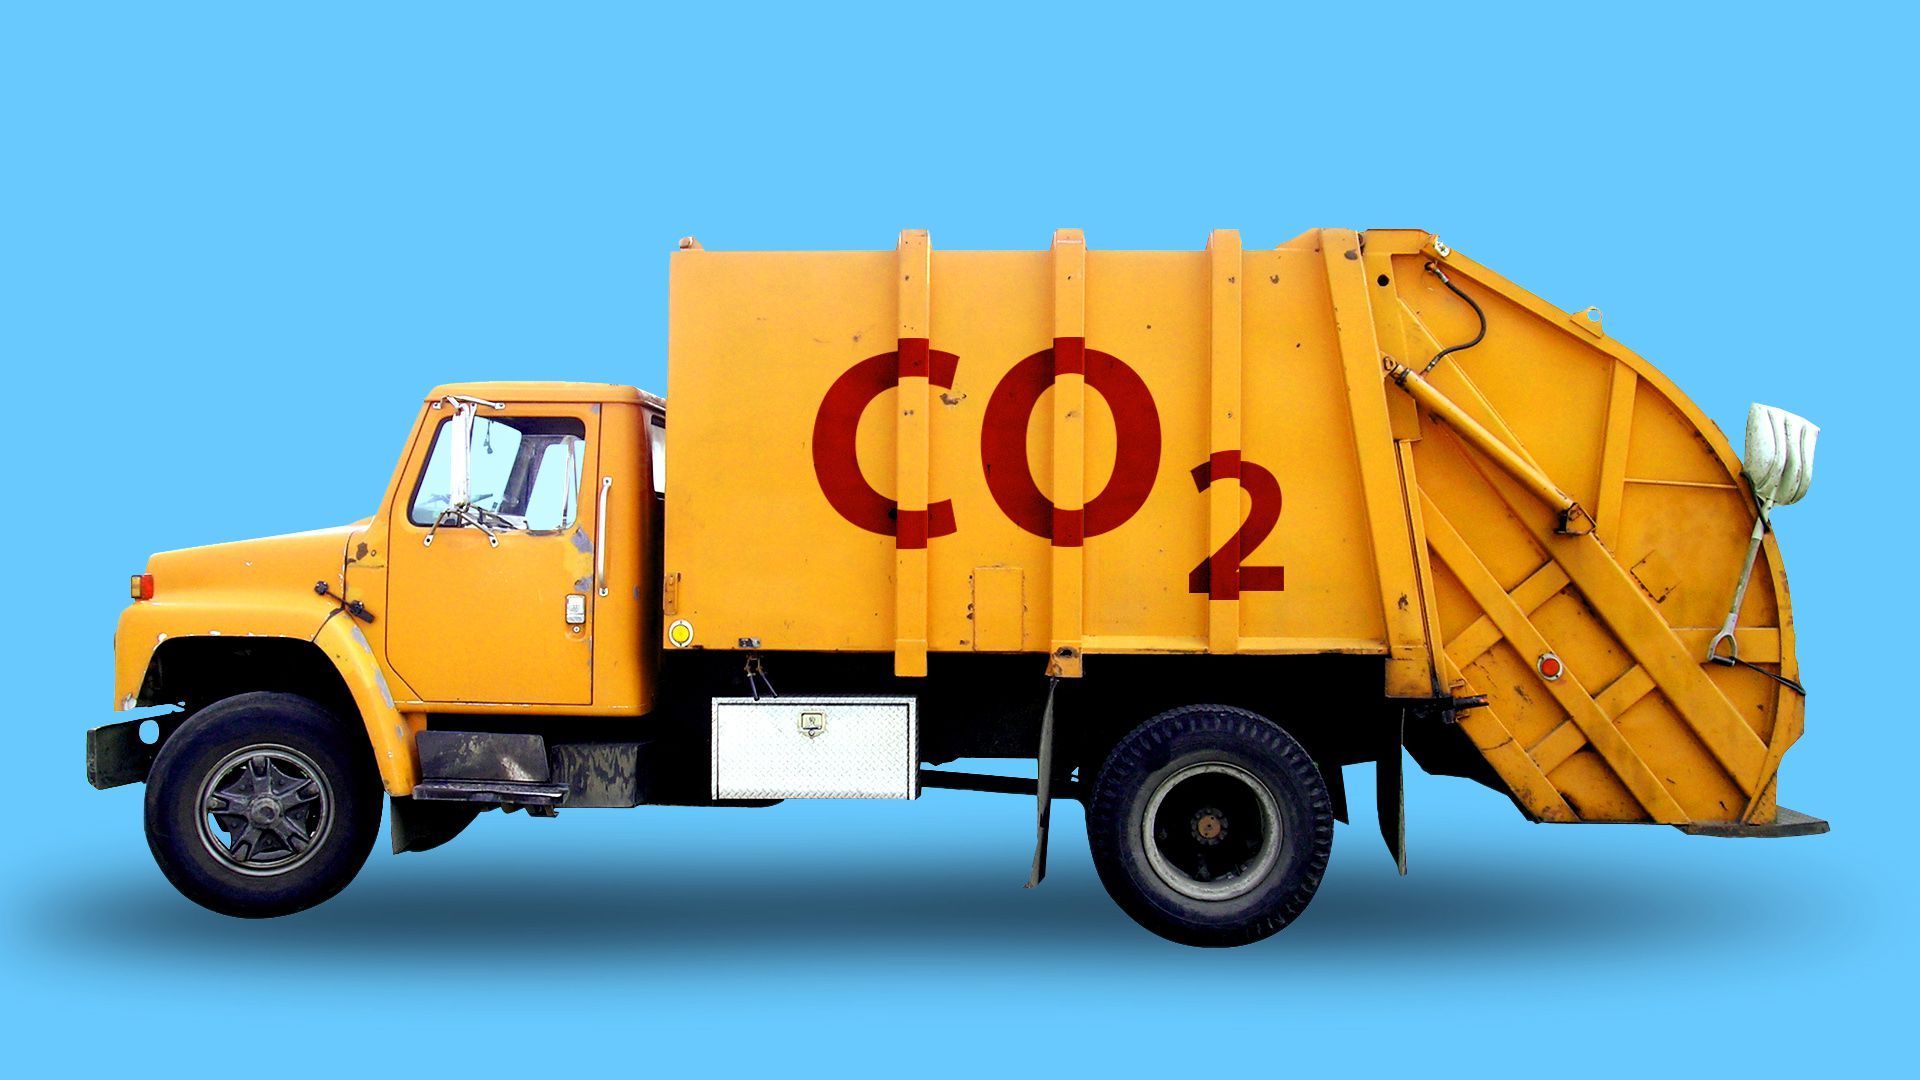 Illustration of a garbage truck labeled as though it is a carbon dioxide removal vehicle